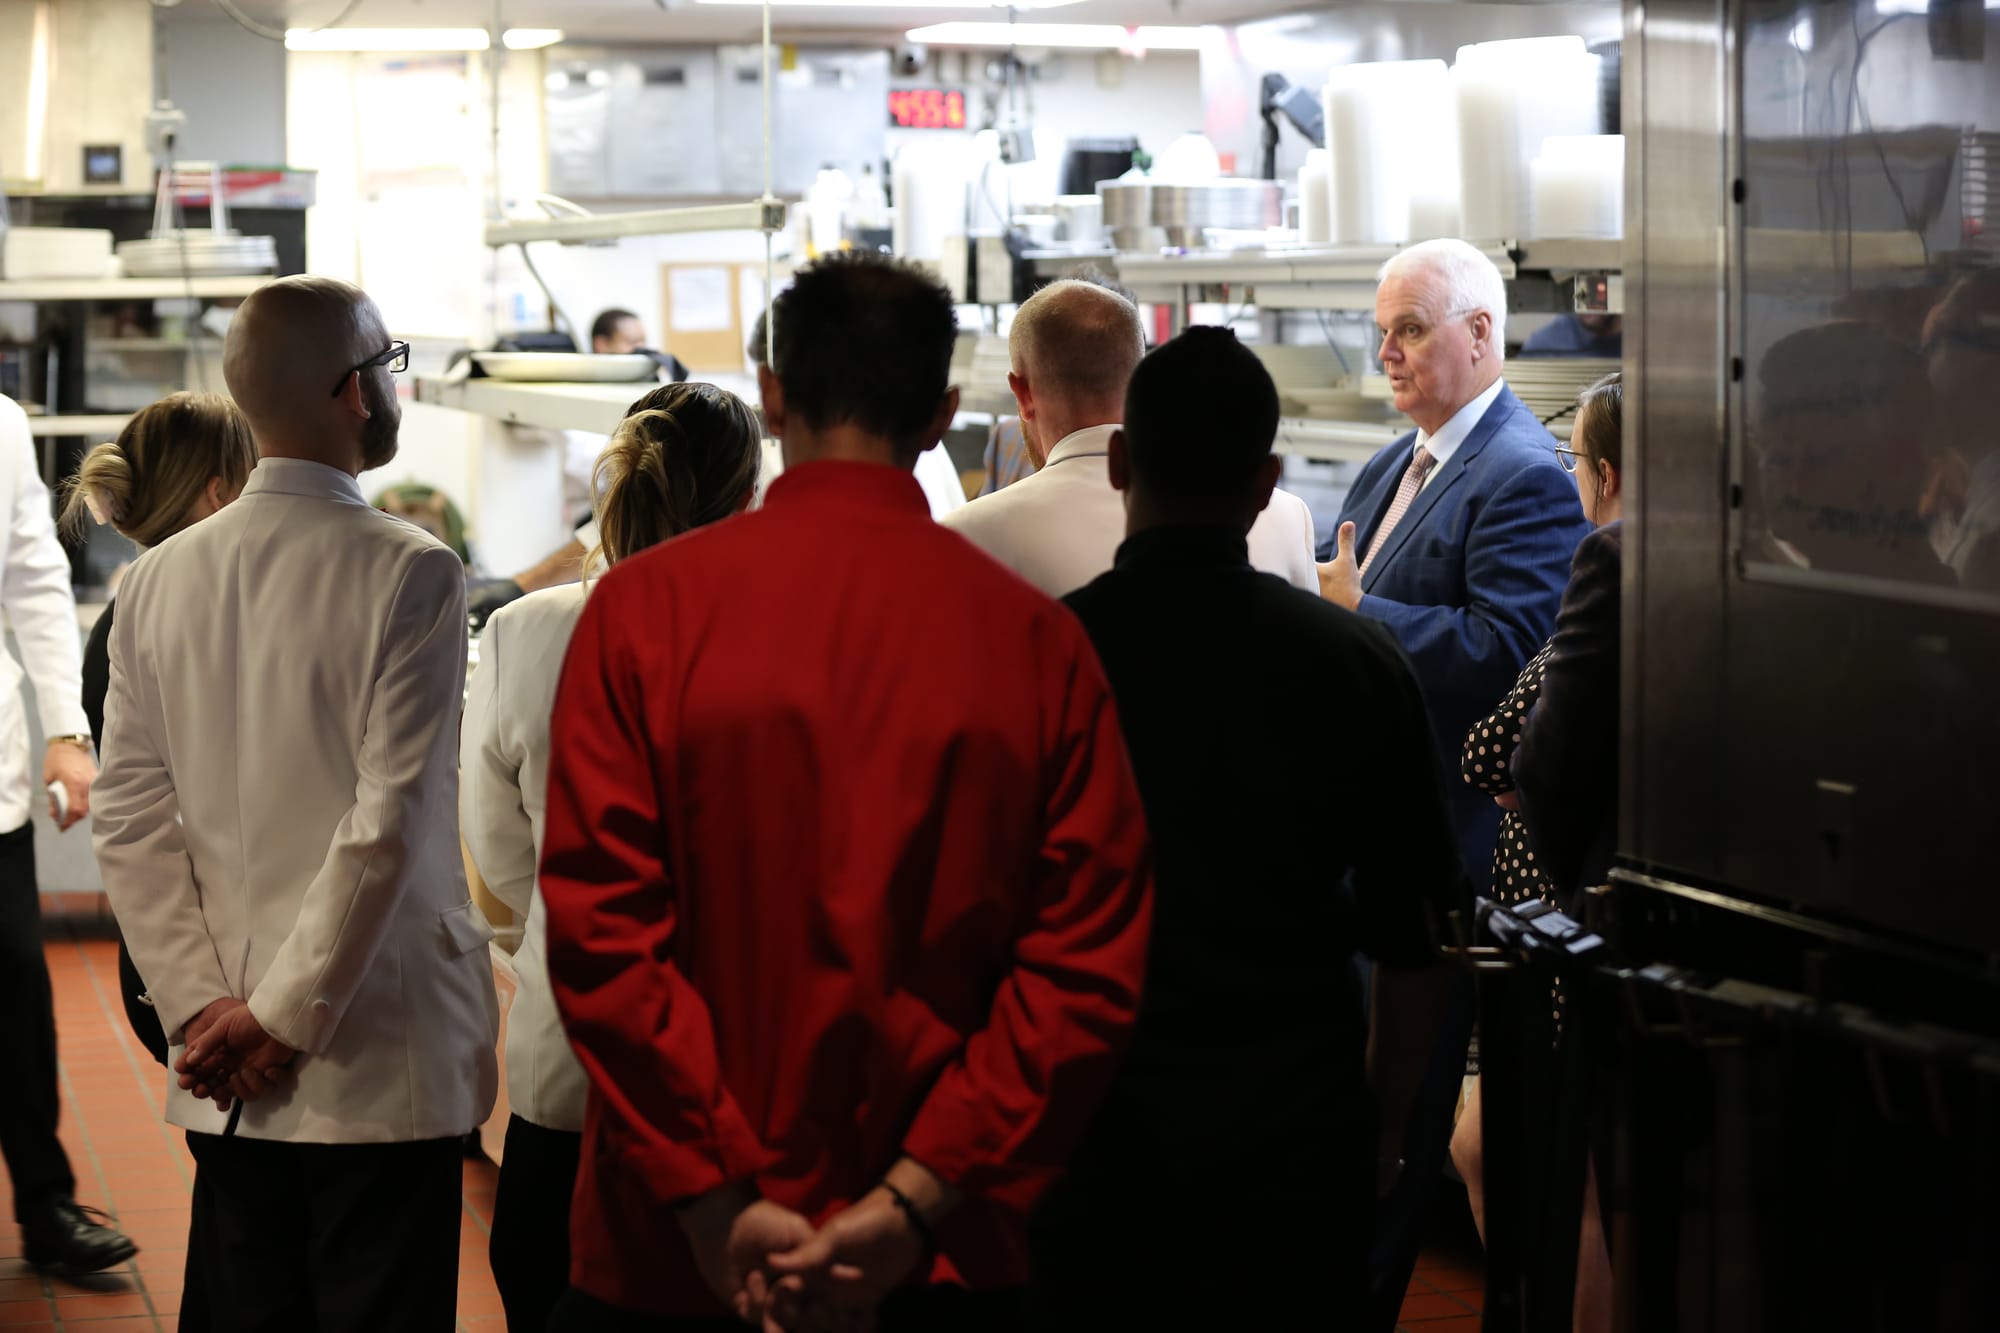 A pre-shift meeting in the kitchen of a restaurant